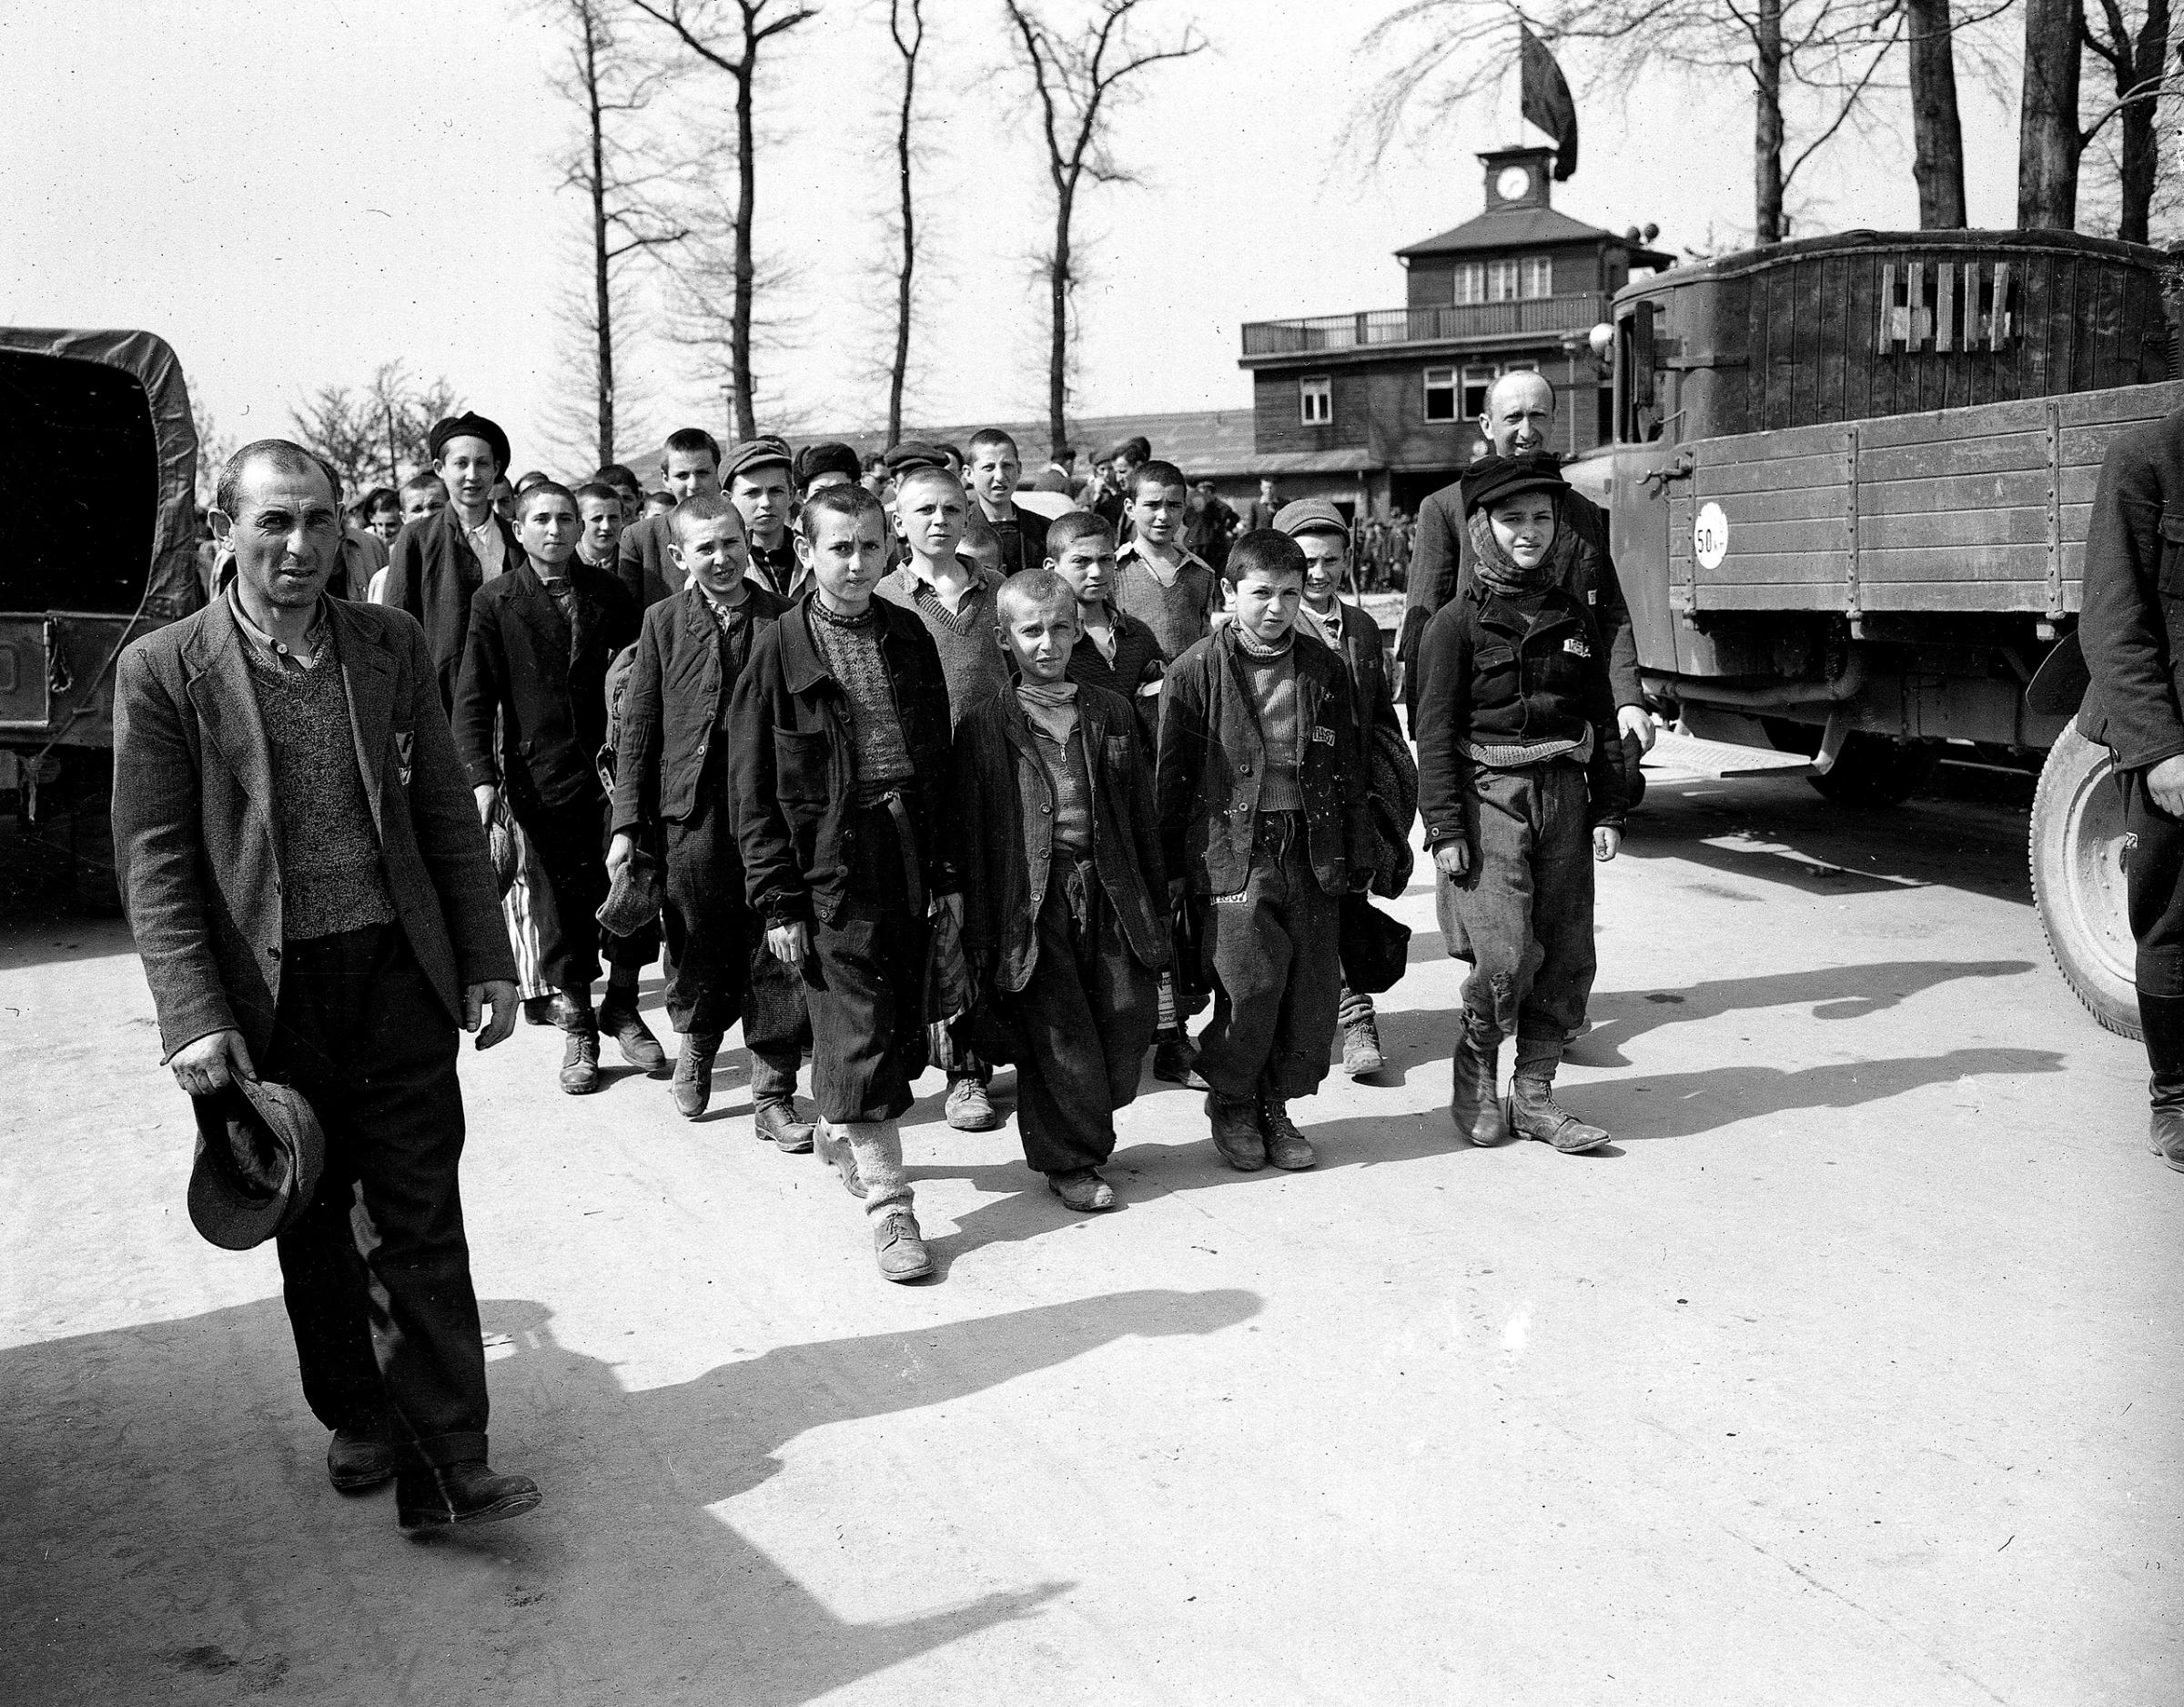 Children and other prisoners liberated by the 3rd U.S. Army march from Buchenwald concentration camp near Weimar, Germany, in April 1945. The freed prisoners are walking to an American hospital to receive treatment. The tall youth in the line at left, fourth from the front, is Elie Wiesel.